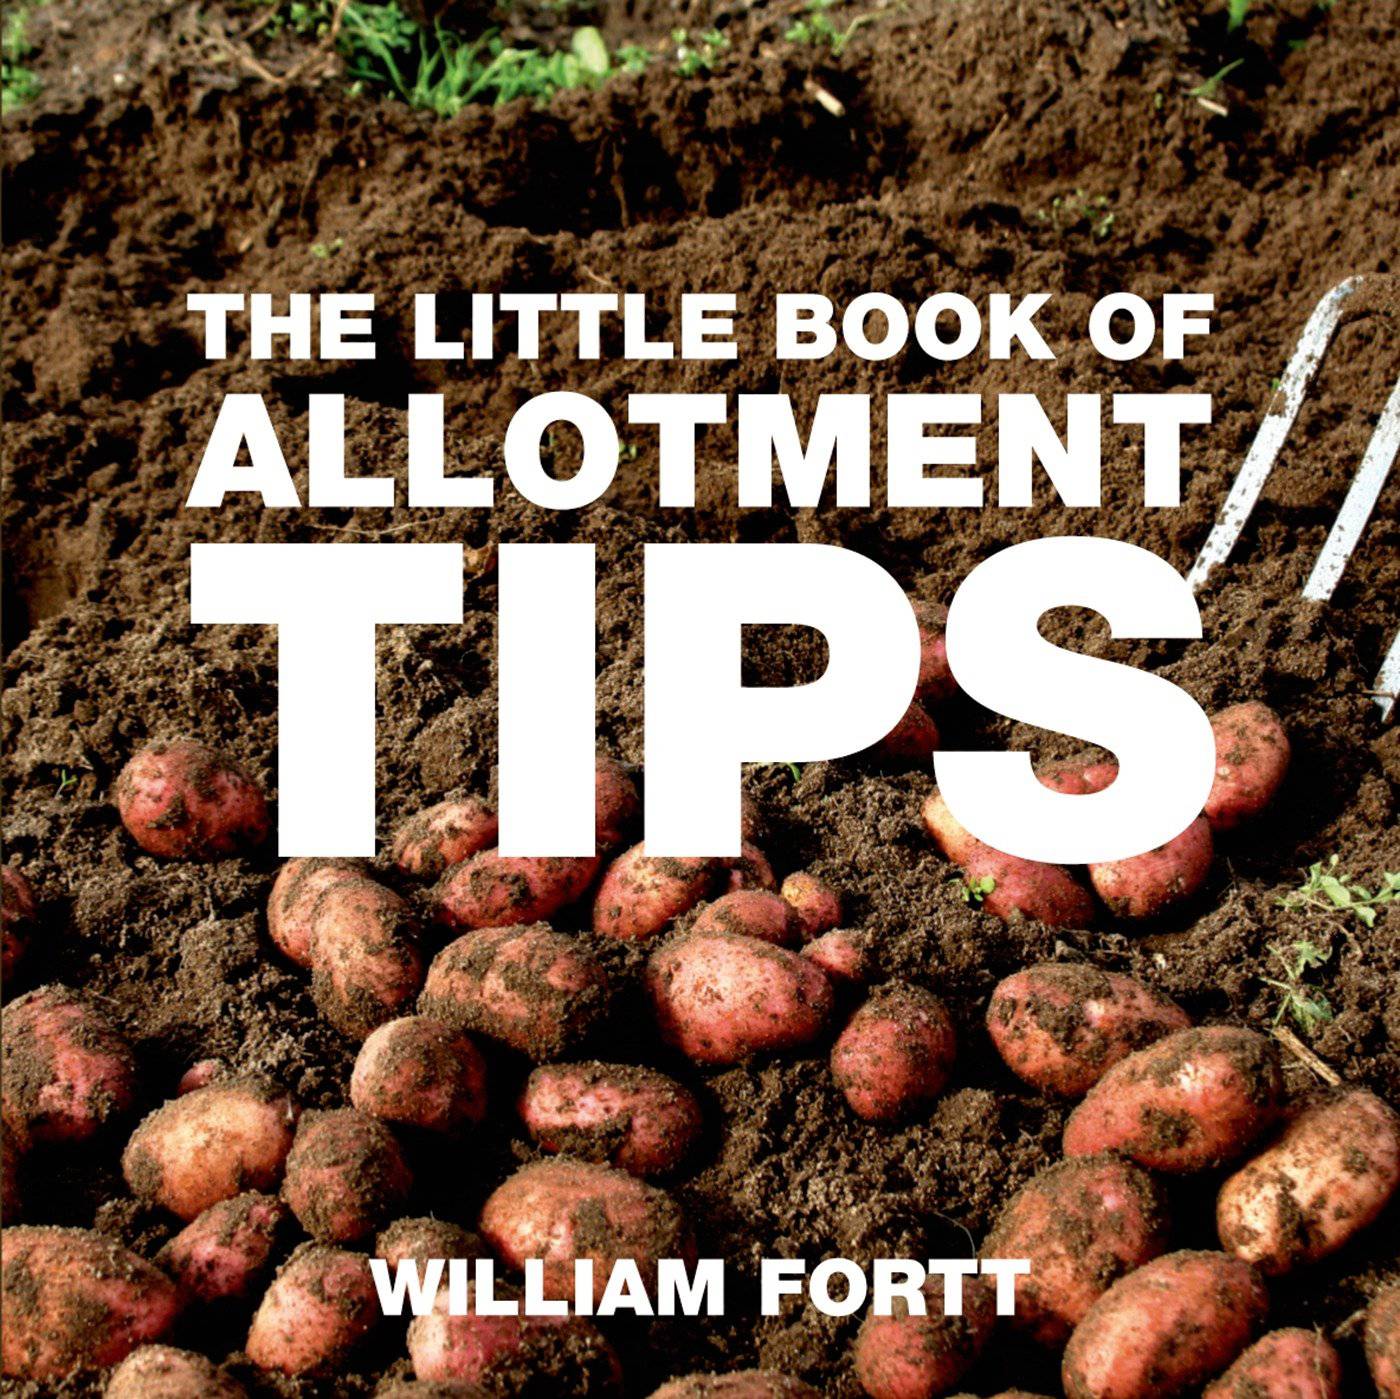 The little book of allotment tips by William Fortt